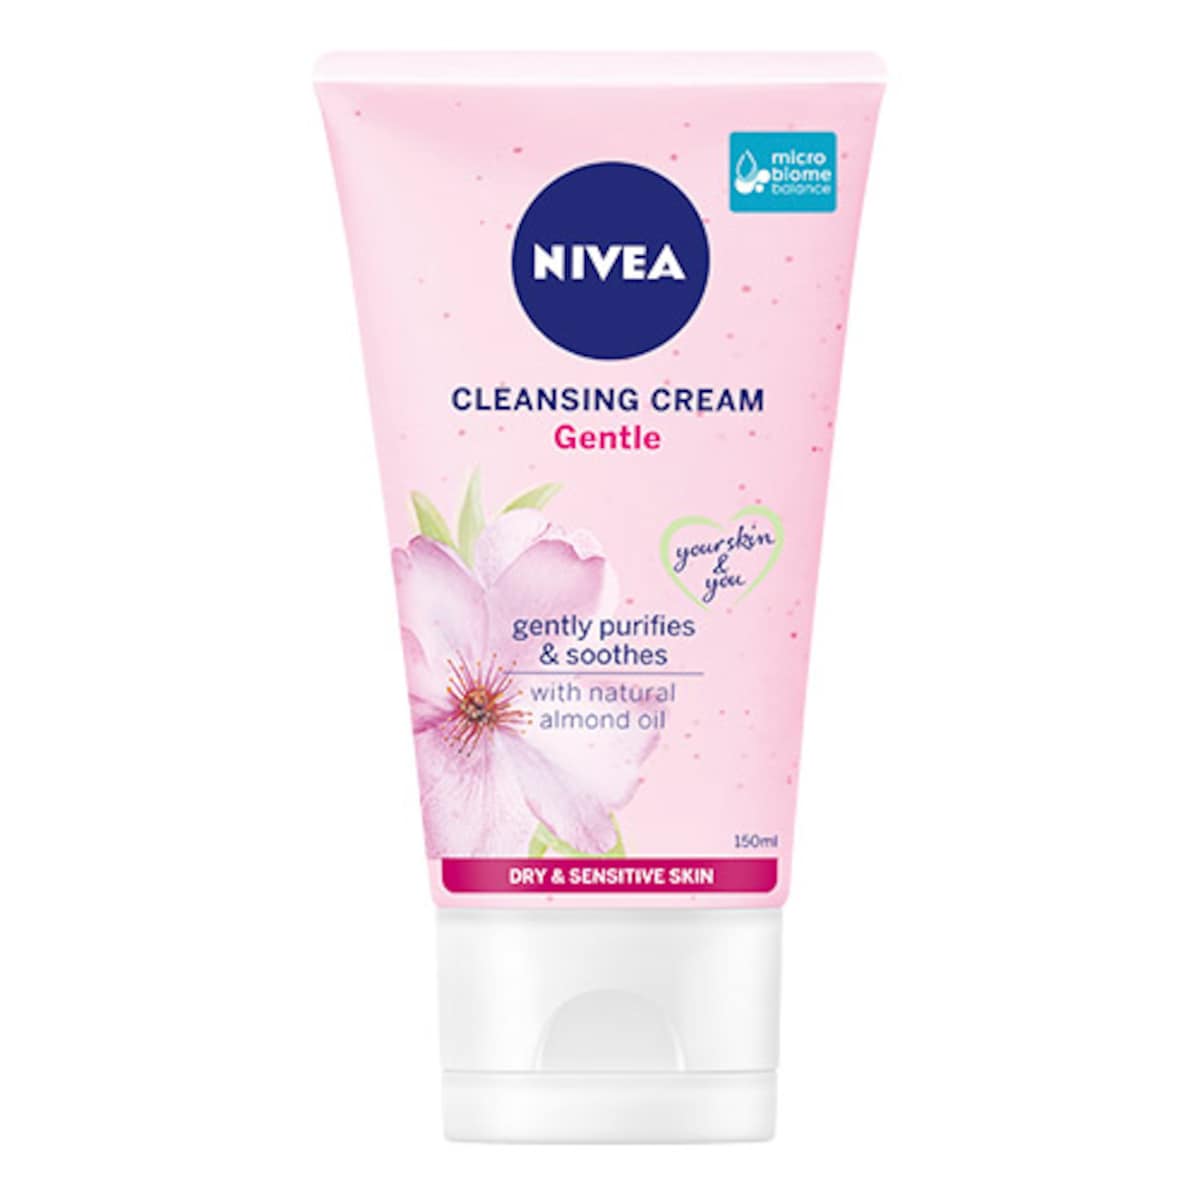 Nivea Gentle Cleansing Cream with Almond Oil 150ml